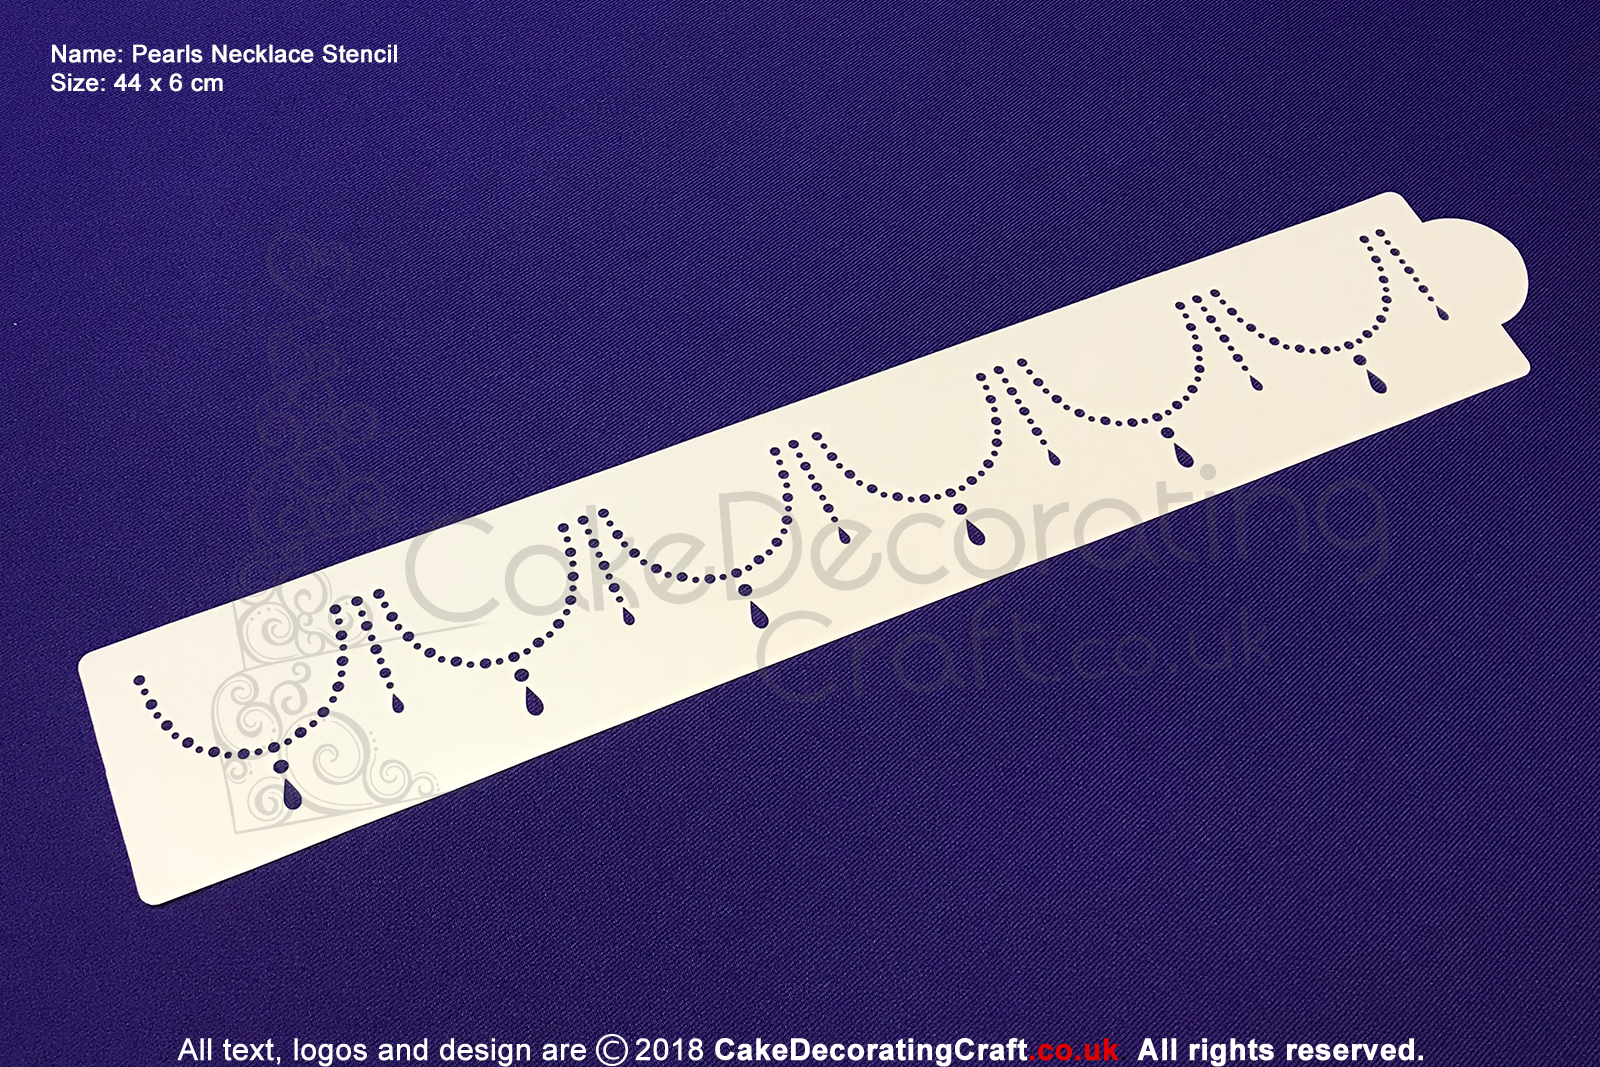 Pearl Necklace Long Stencil | Air Brush Stenciling | Cake and Cupcake Decorating Craft Tool